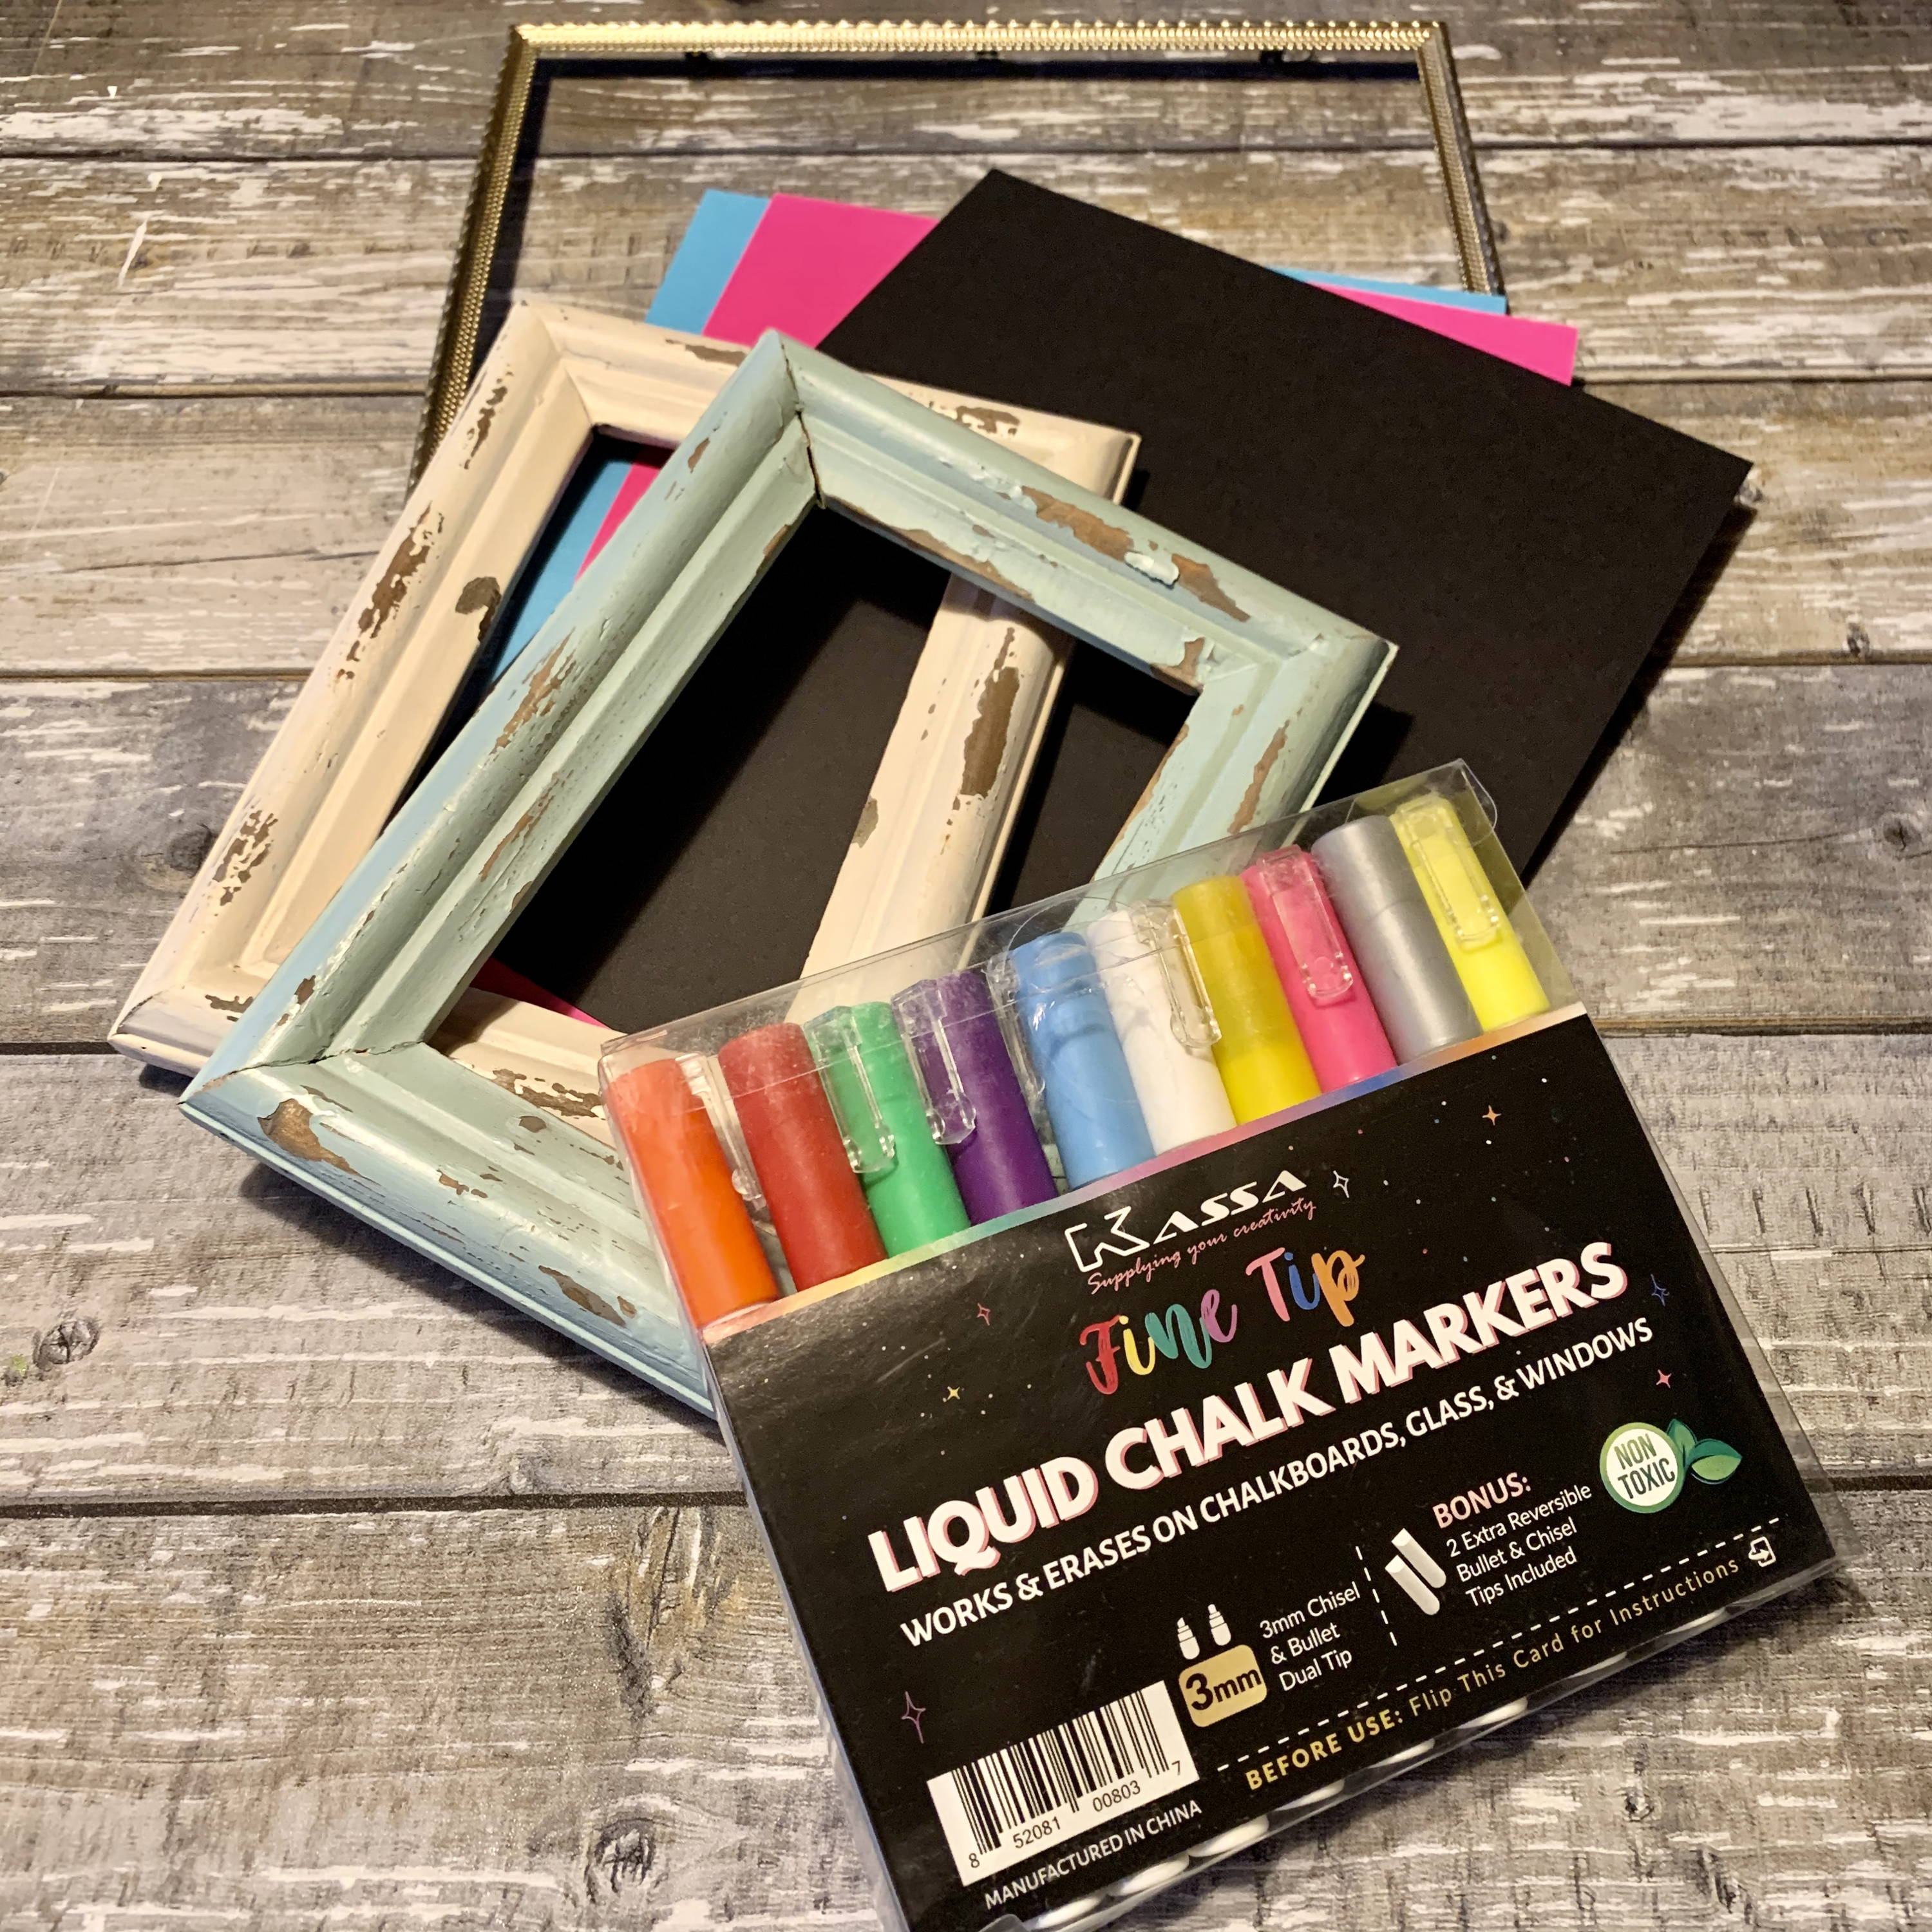 How to Use Chalk Markers on Glass